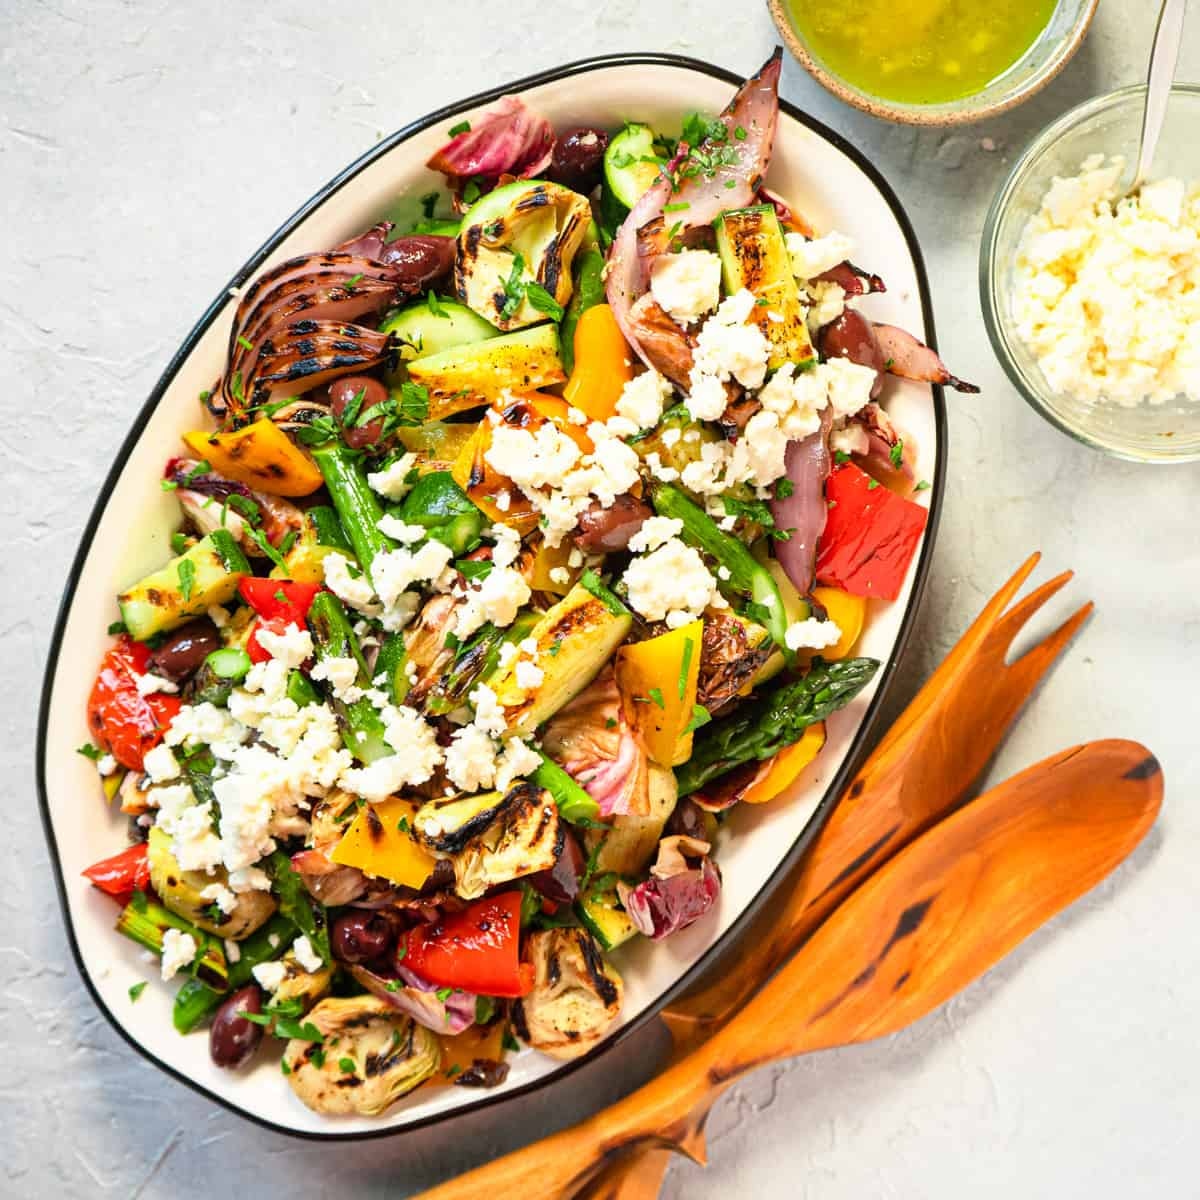 8 Refreshing Veggie Salad Recipes to Boost Your Health